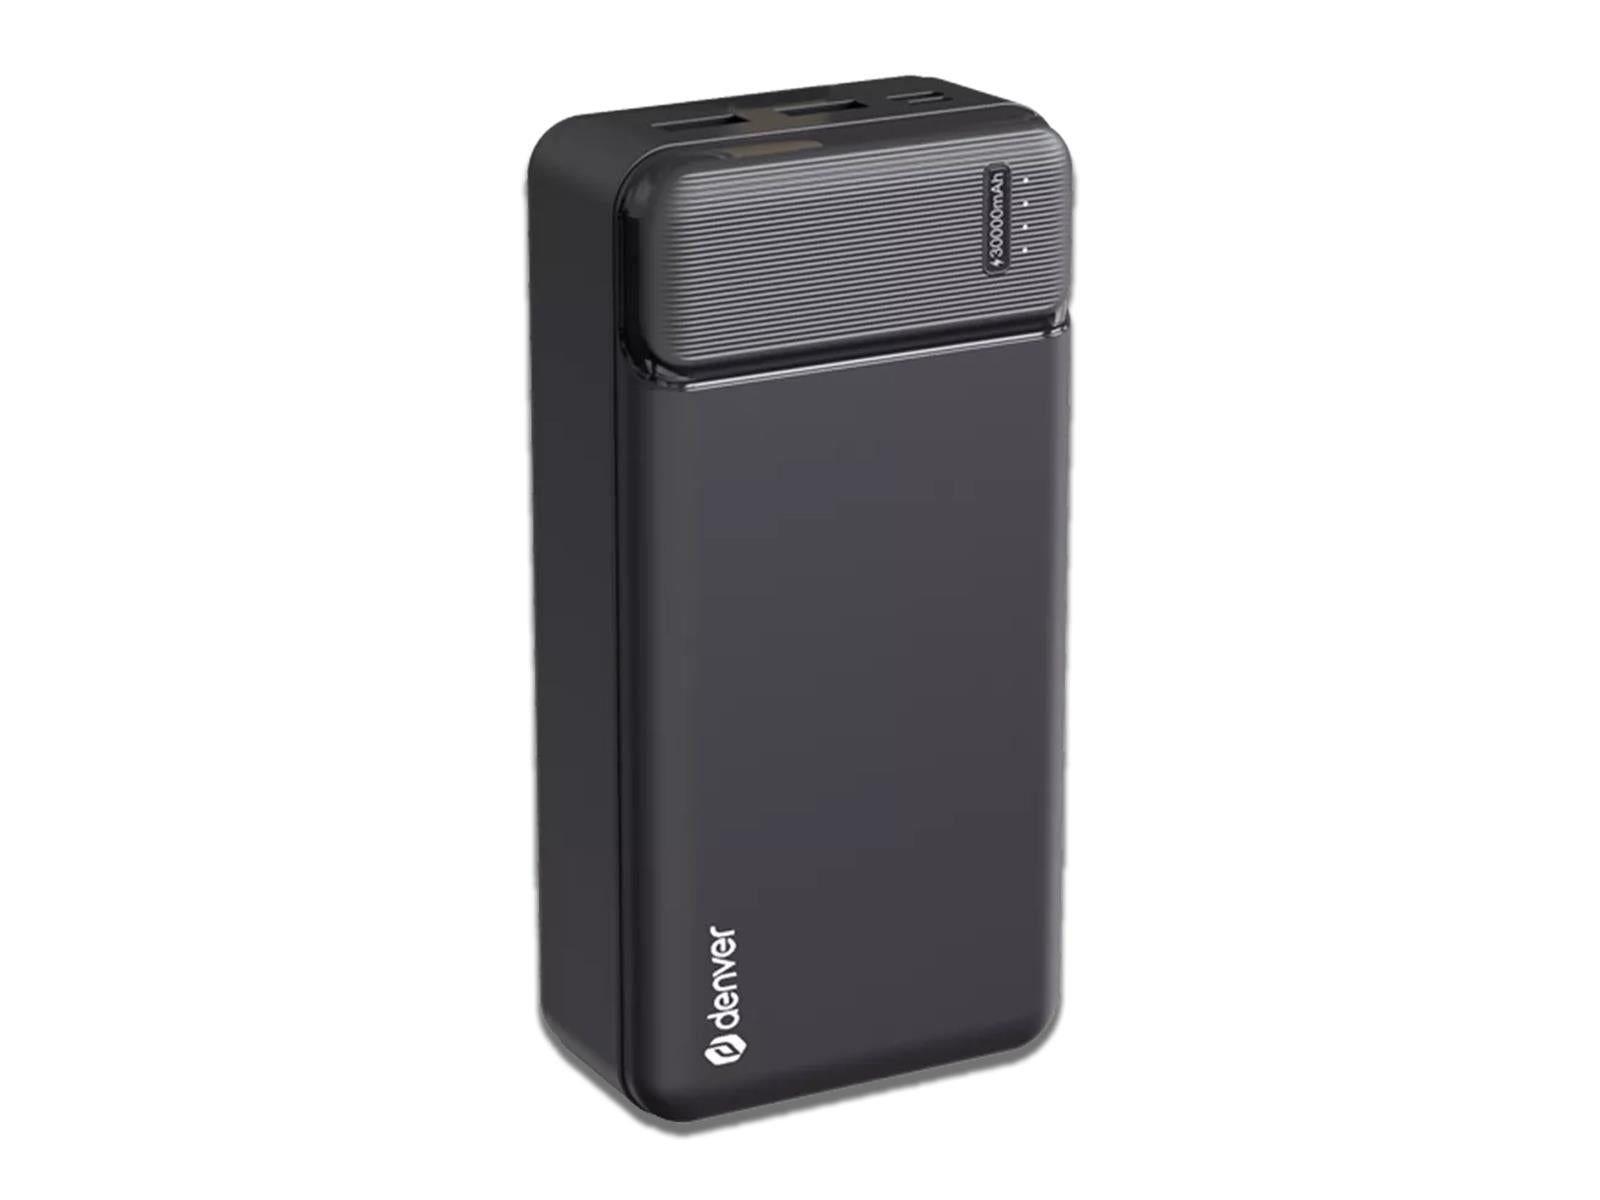 Image shows an angled view of the 30,000mAh Denver High Capacity Portable Charger